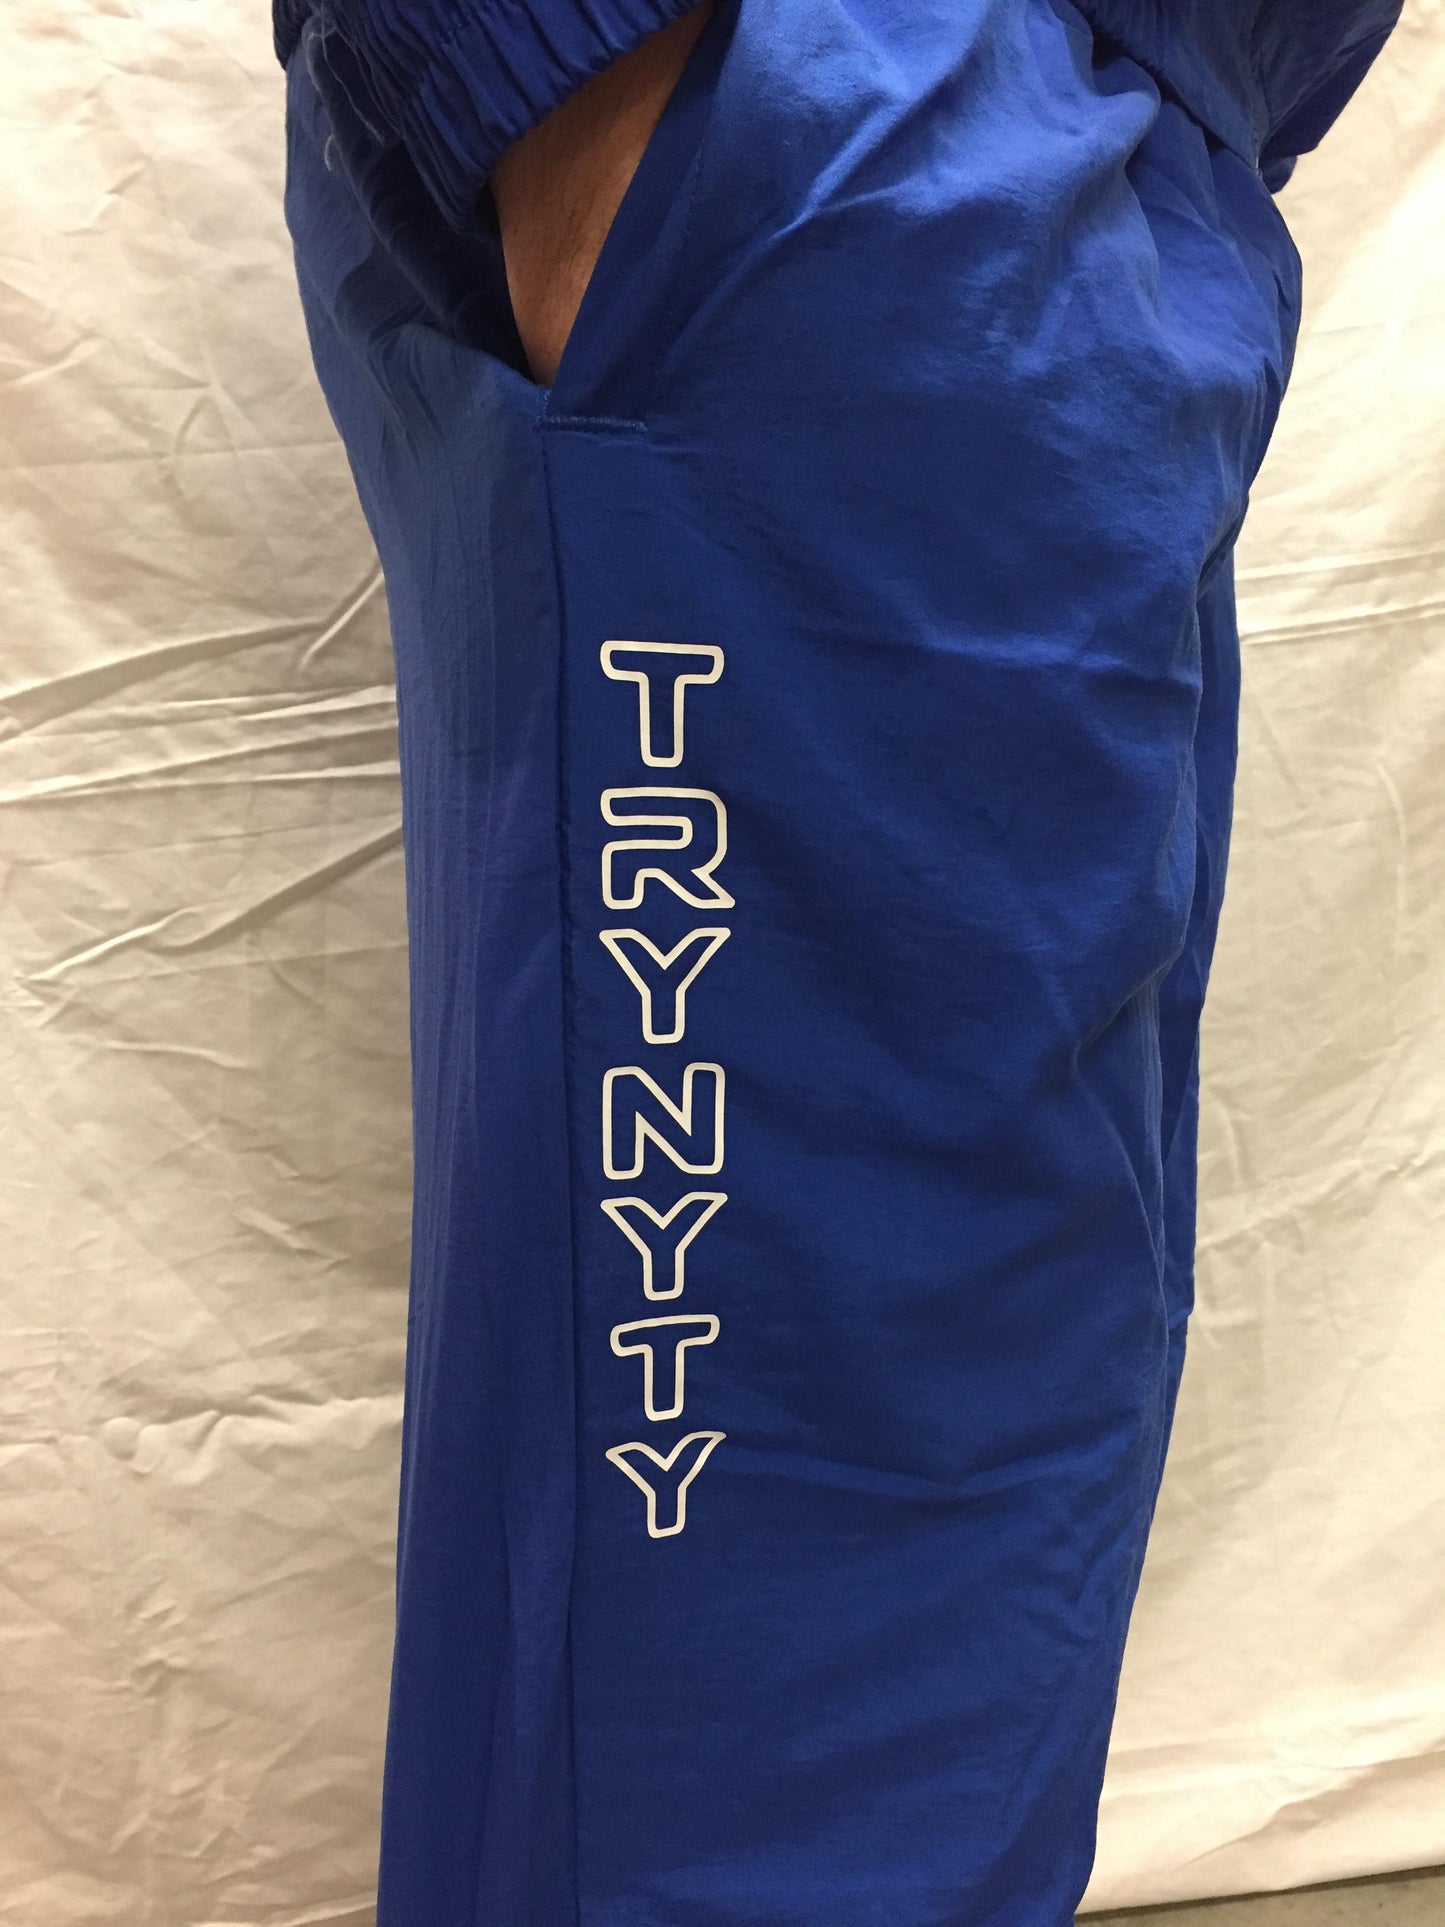 TRYNYTY Limited Edition Retro Track Pants - Royal Blue